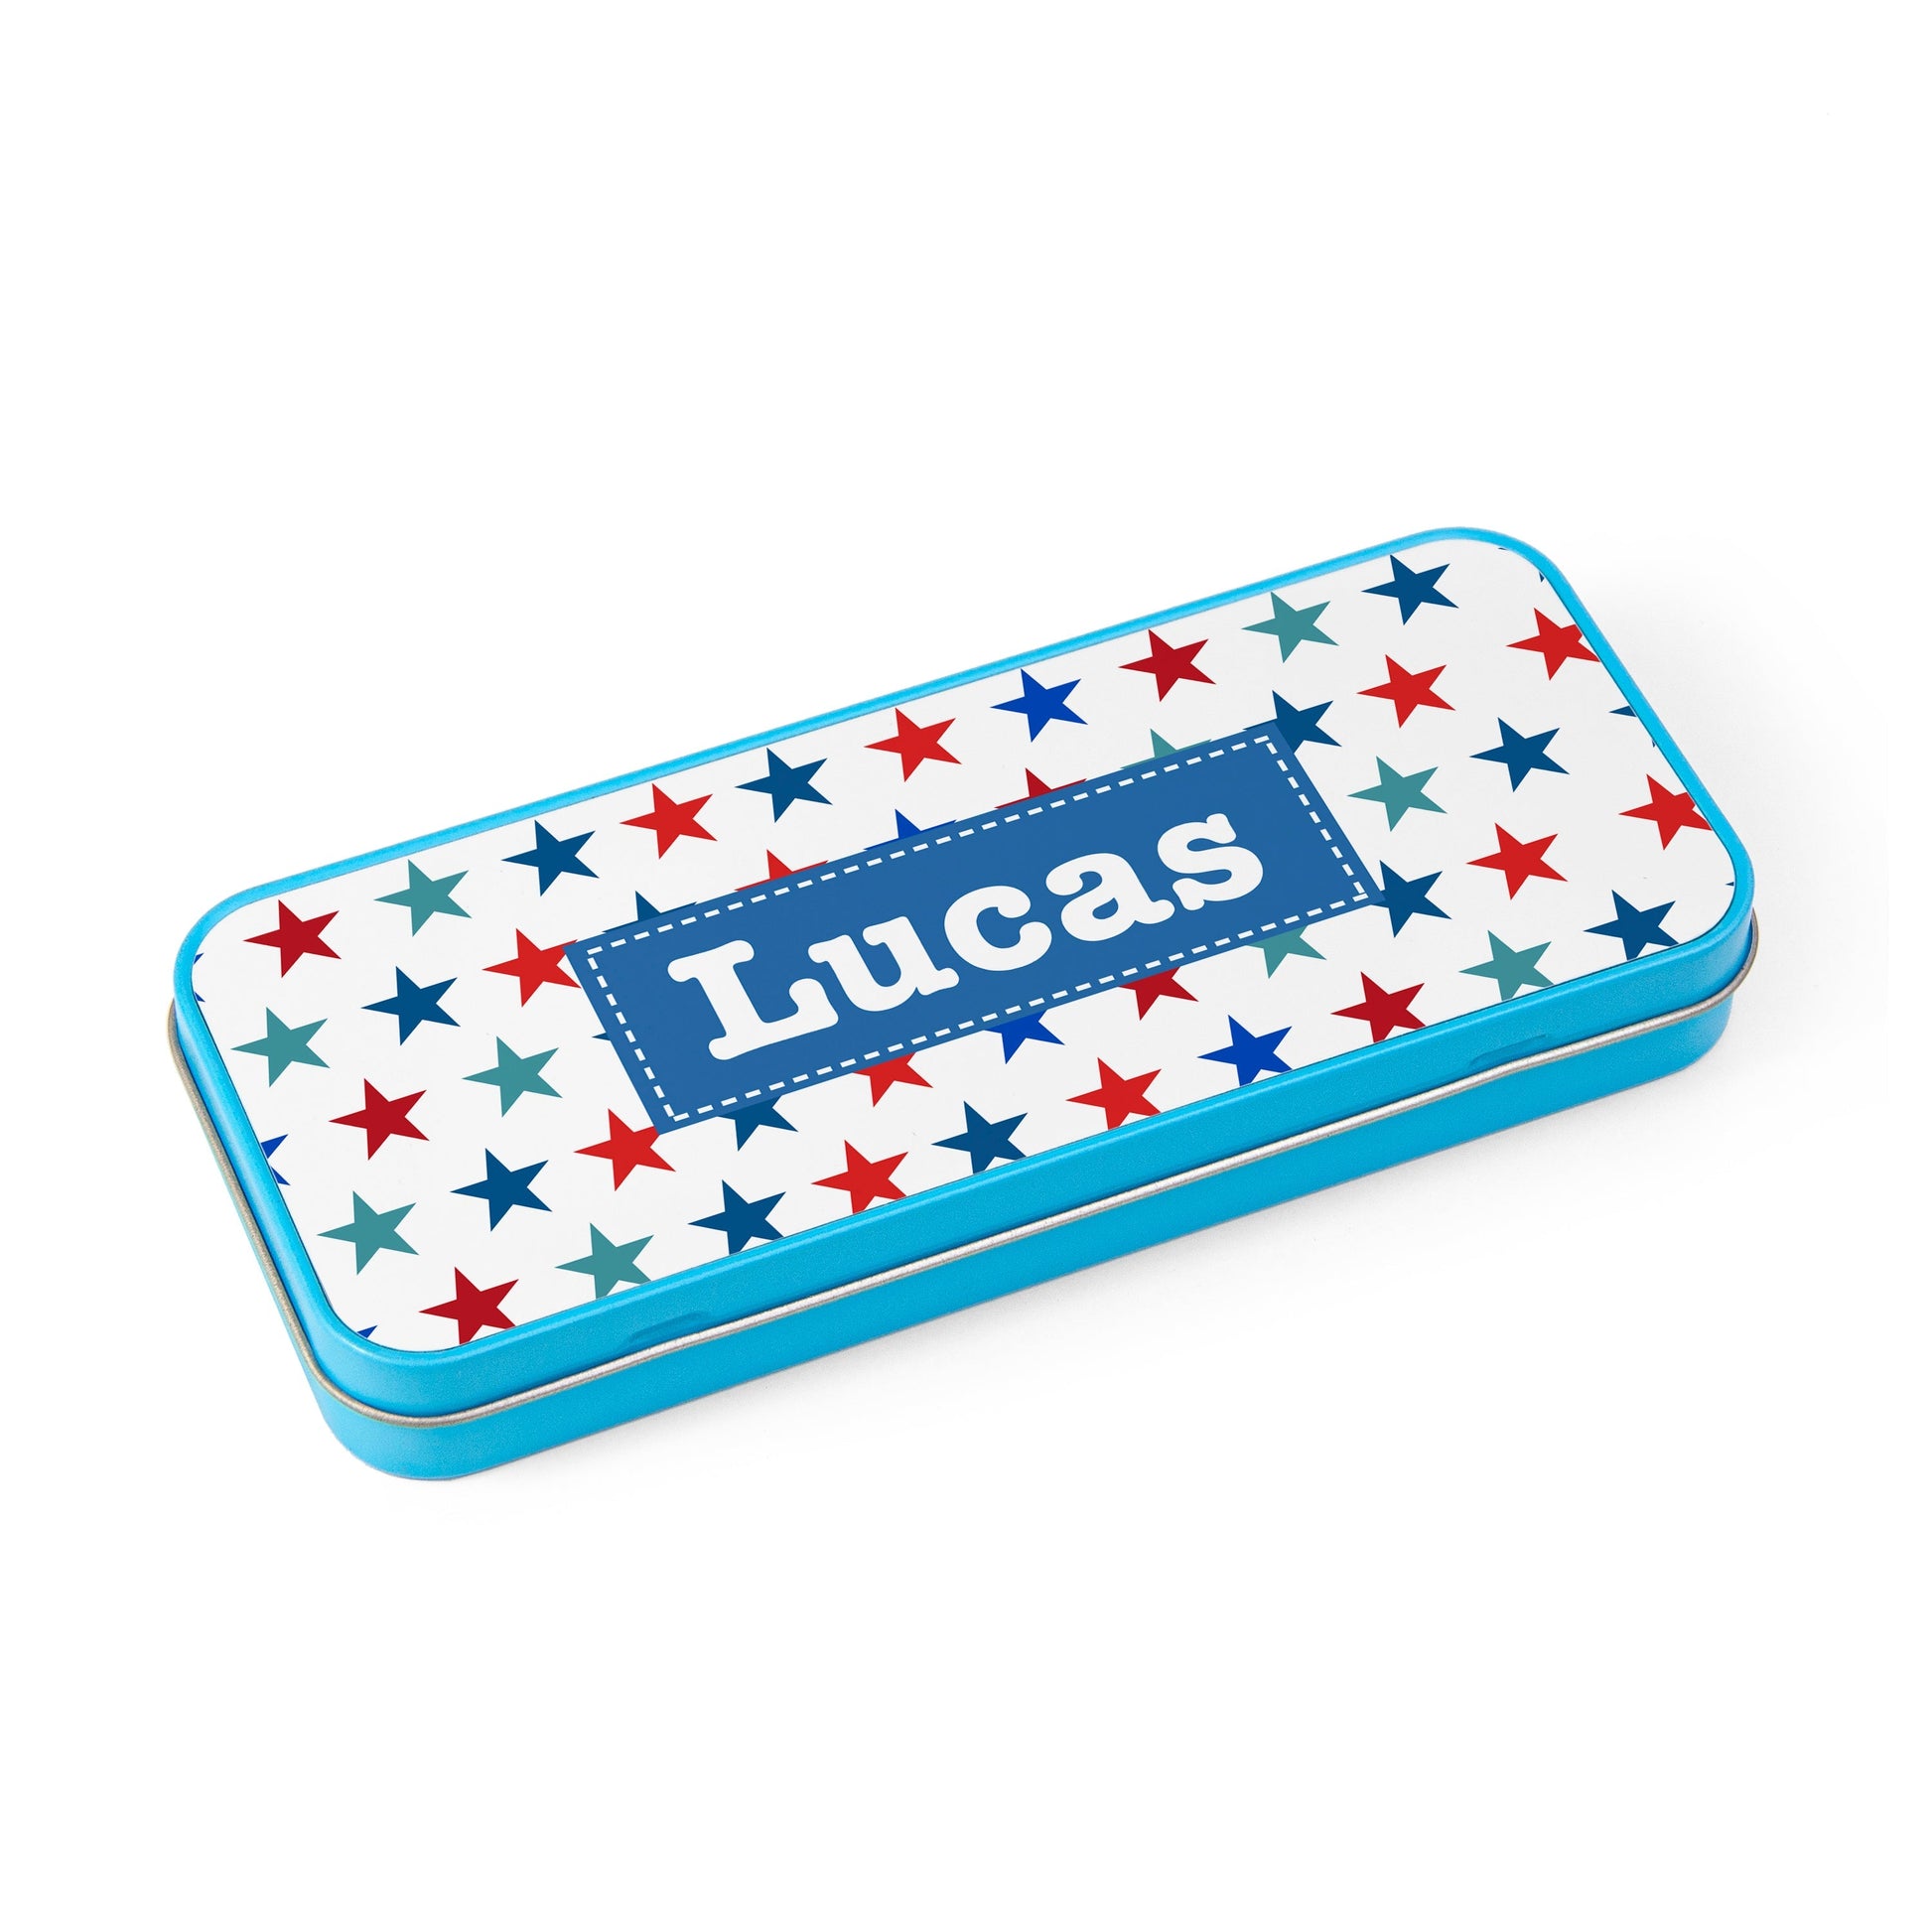 Personalized Pencil Cases - Personalized Boy's Blue Metal Pencil Case Tin 